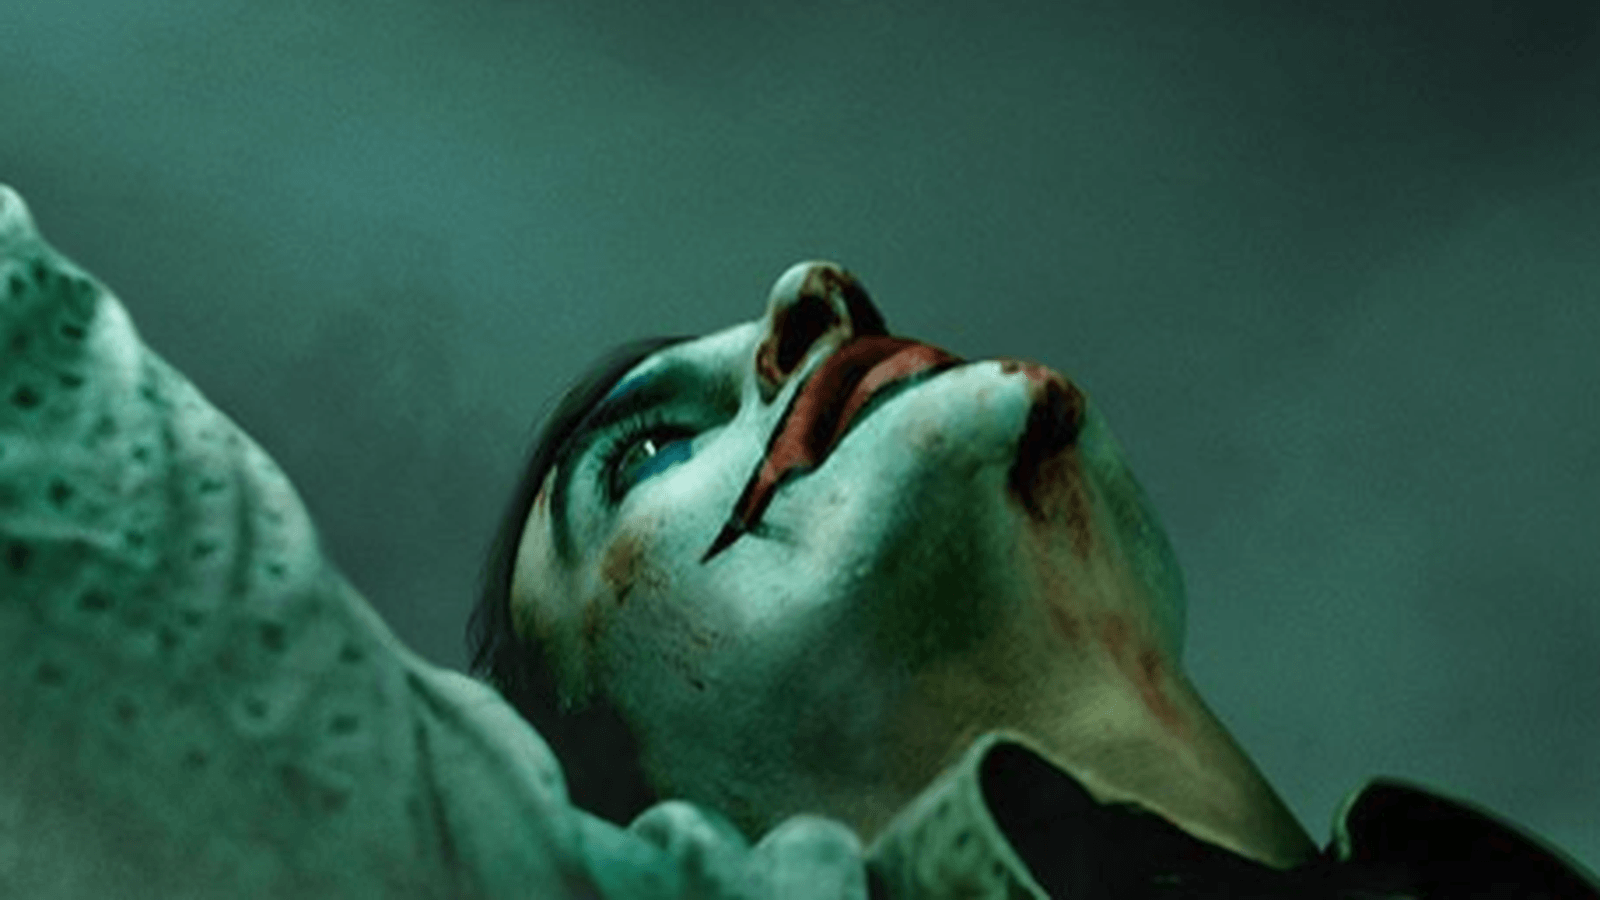 Joaquin Phoenix says he had 'a lot of fear' of playing the Joker